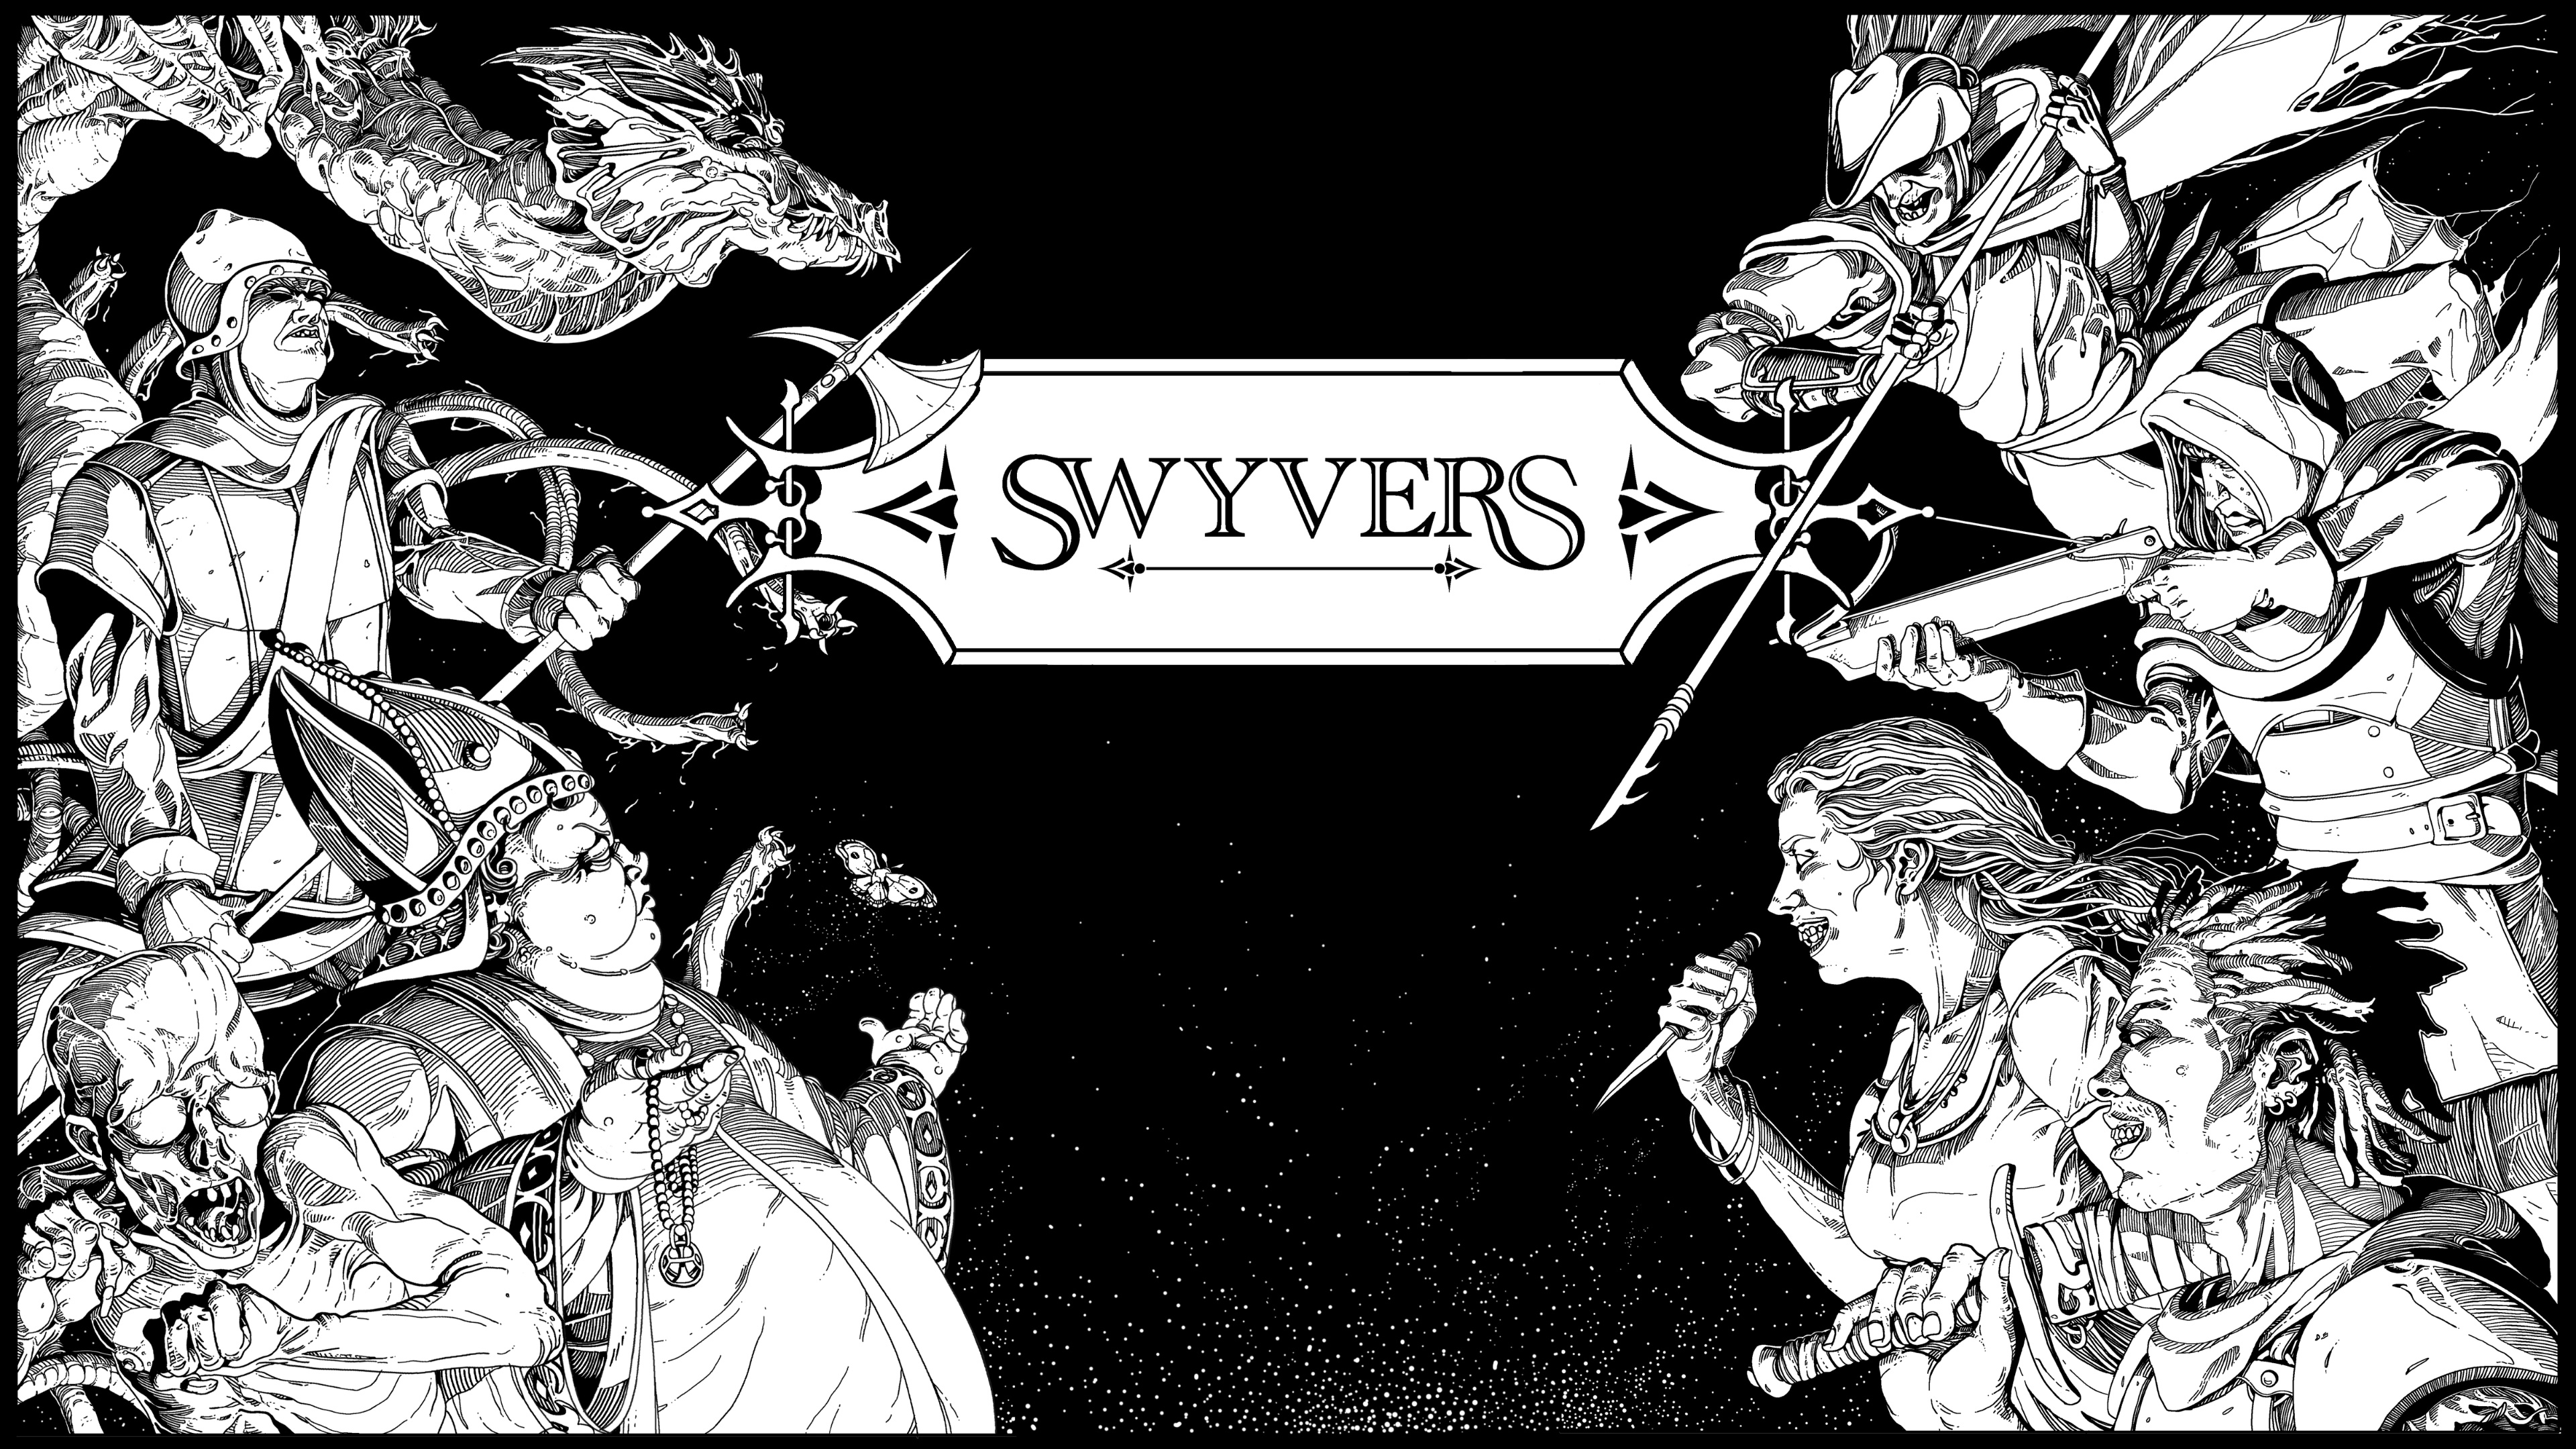 Swyvers